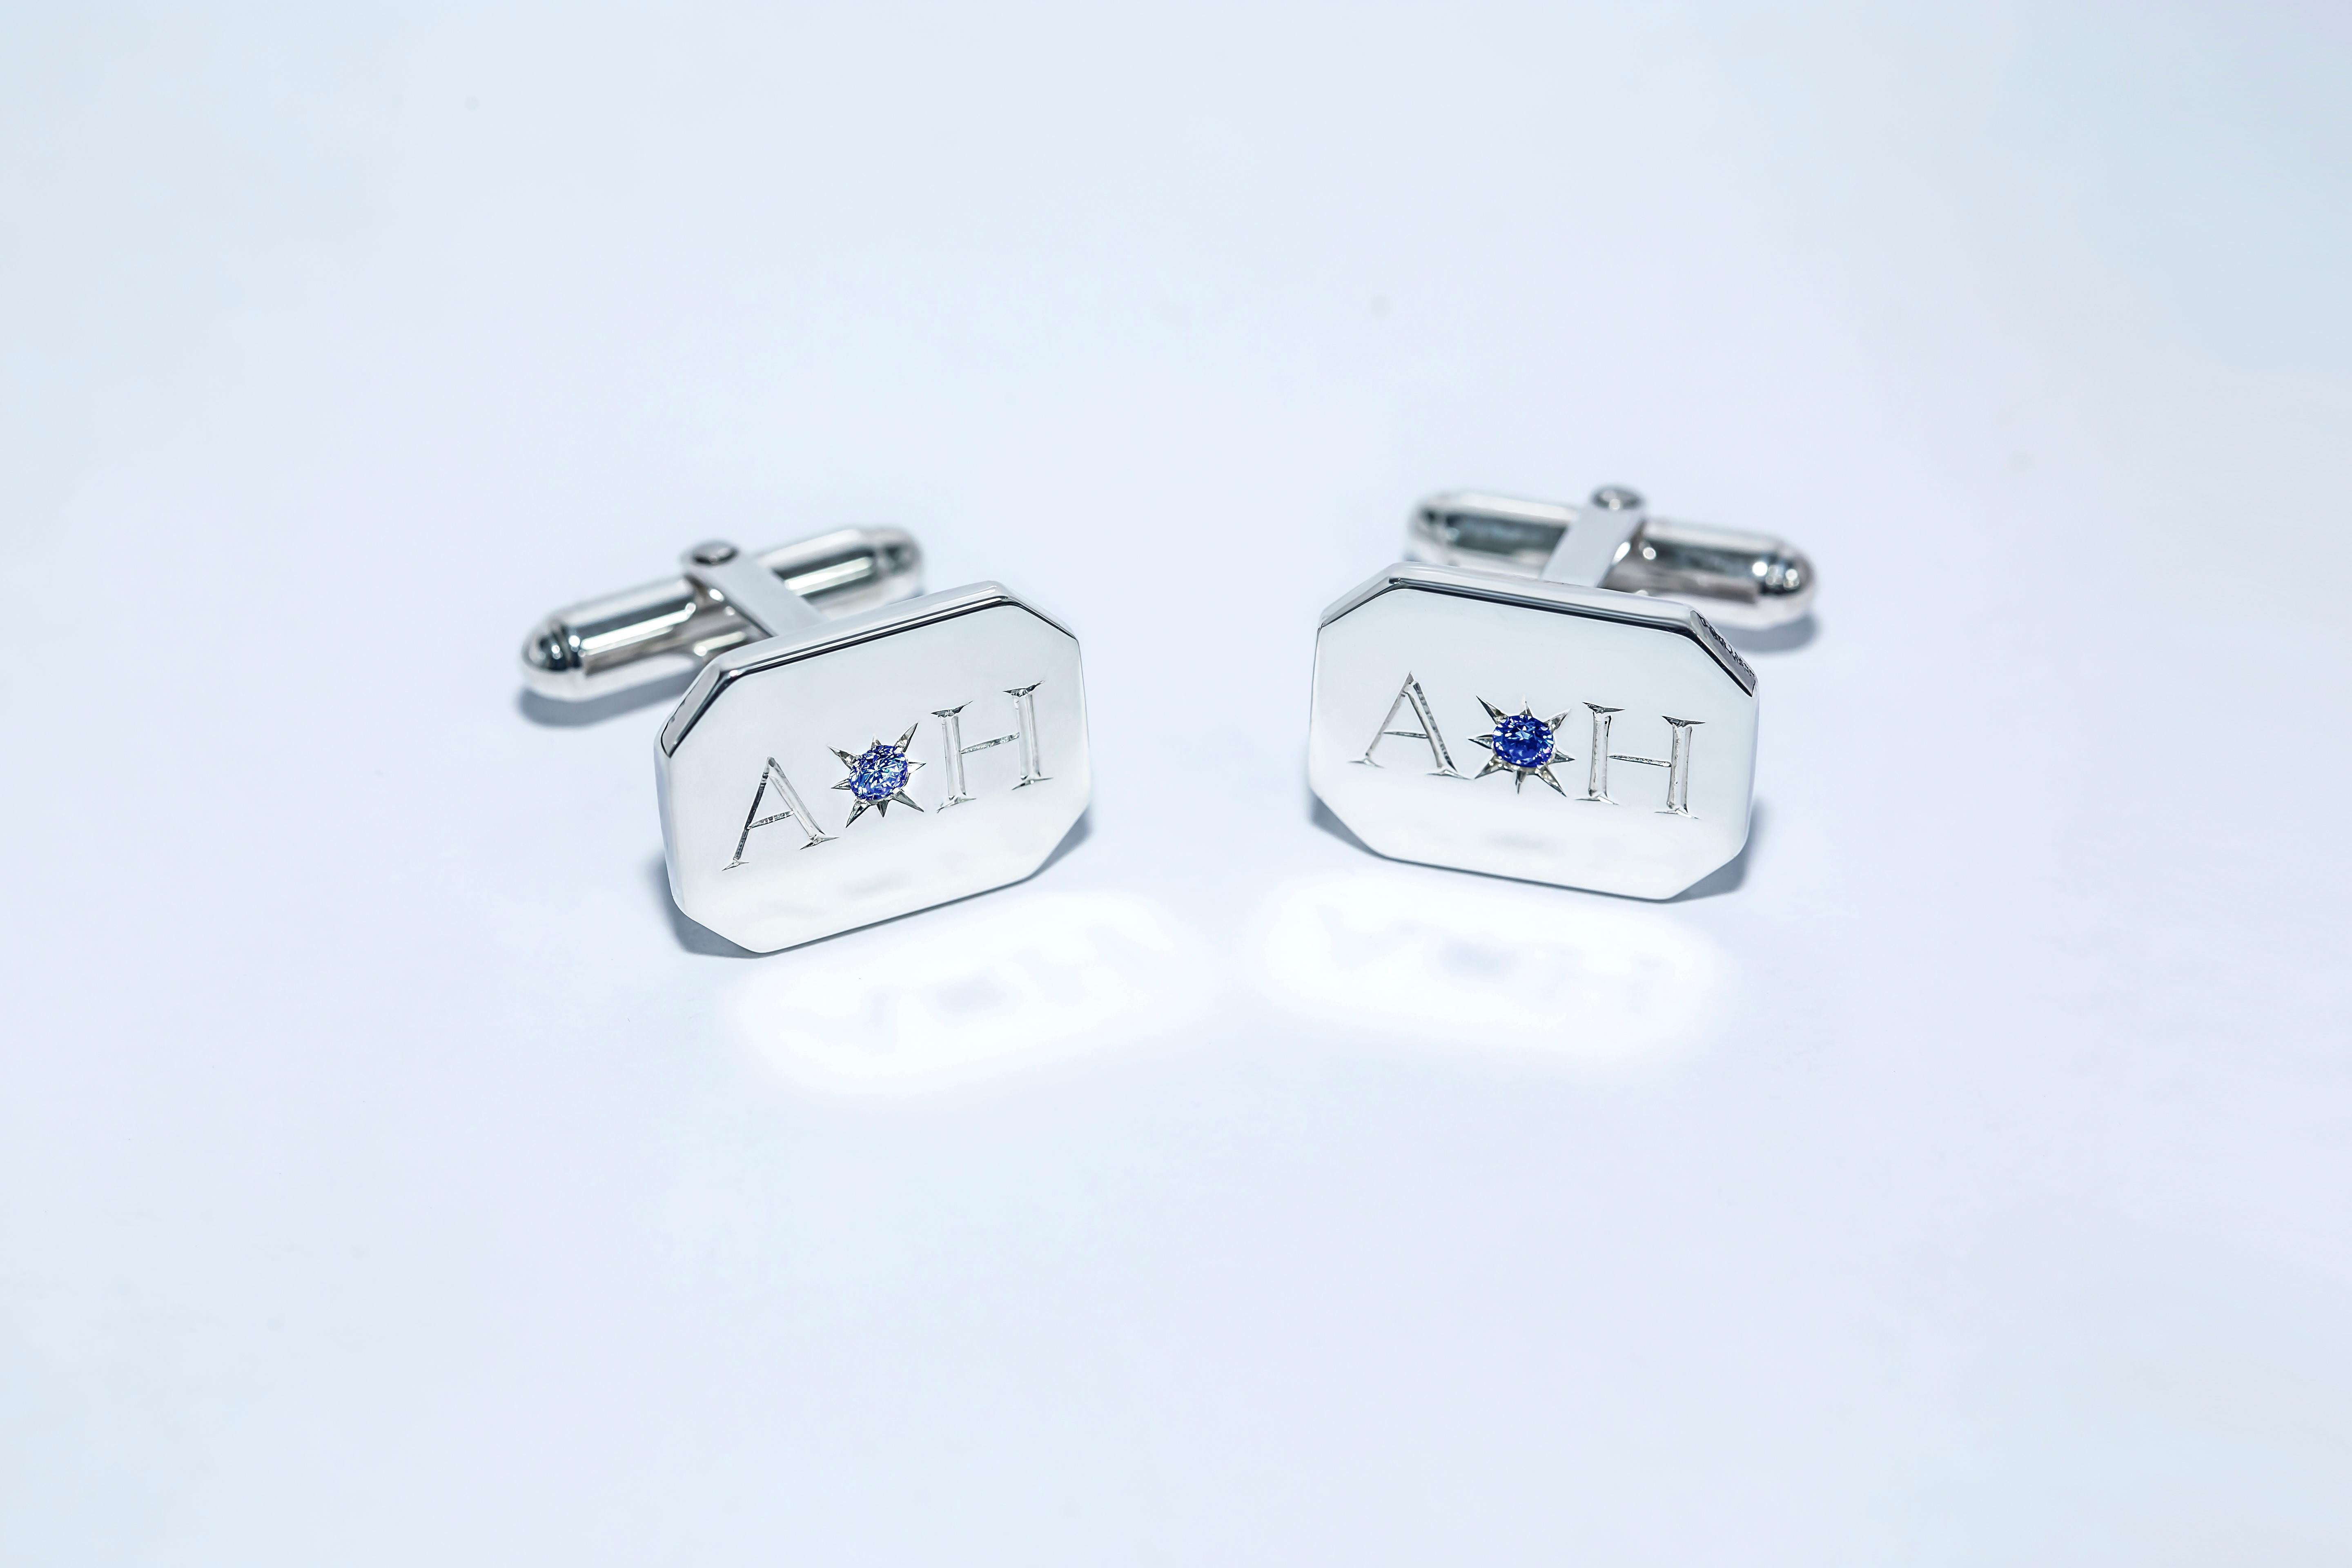 We believe in creating your own unique look by creating your own style.  These cufflinks are completely bespoke and exquisite for the discerning gentleman. Expertly hand crafted in solid sterling silver and hand engraved to your specification. These